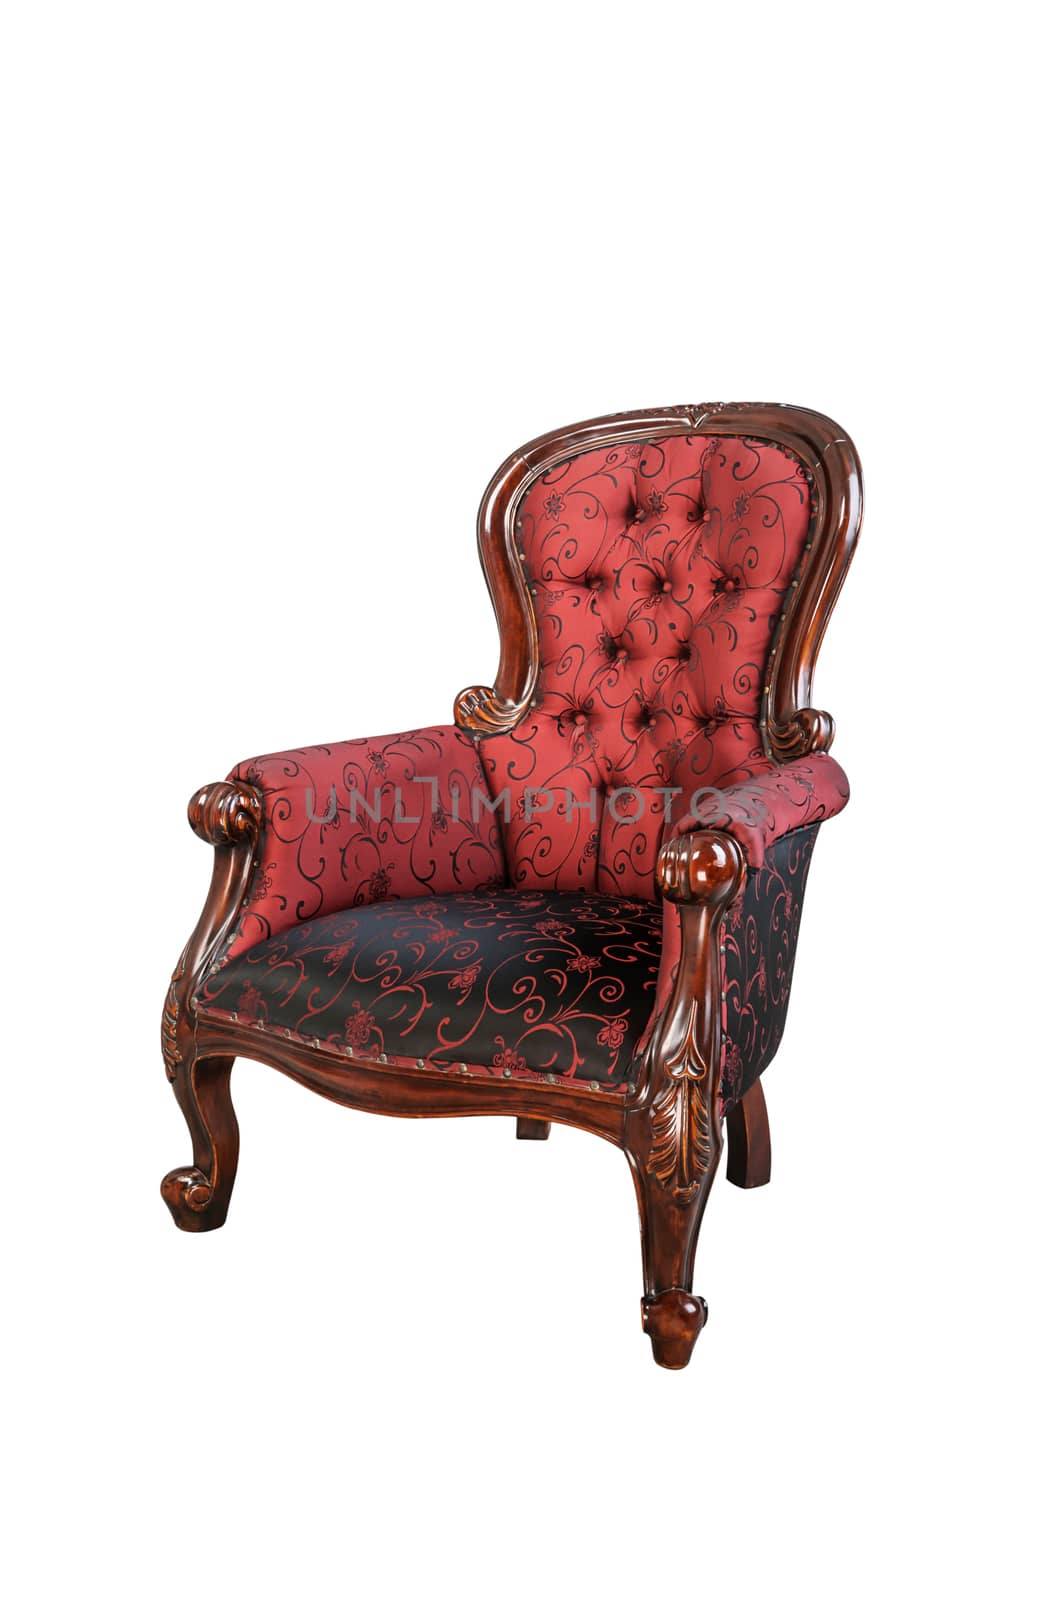 Vintage red silk cloth chair isolated on white background